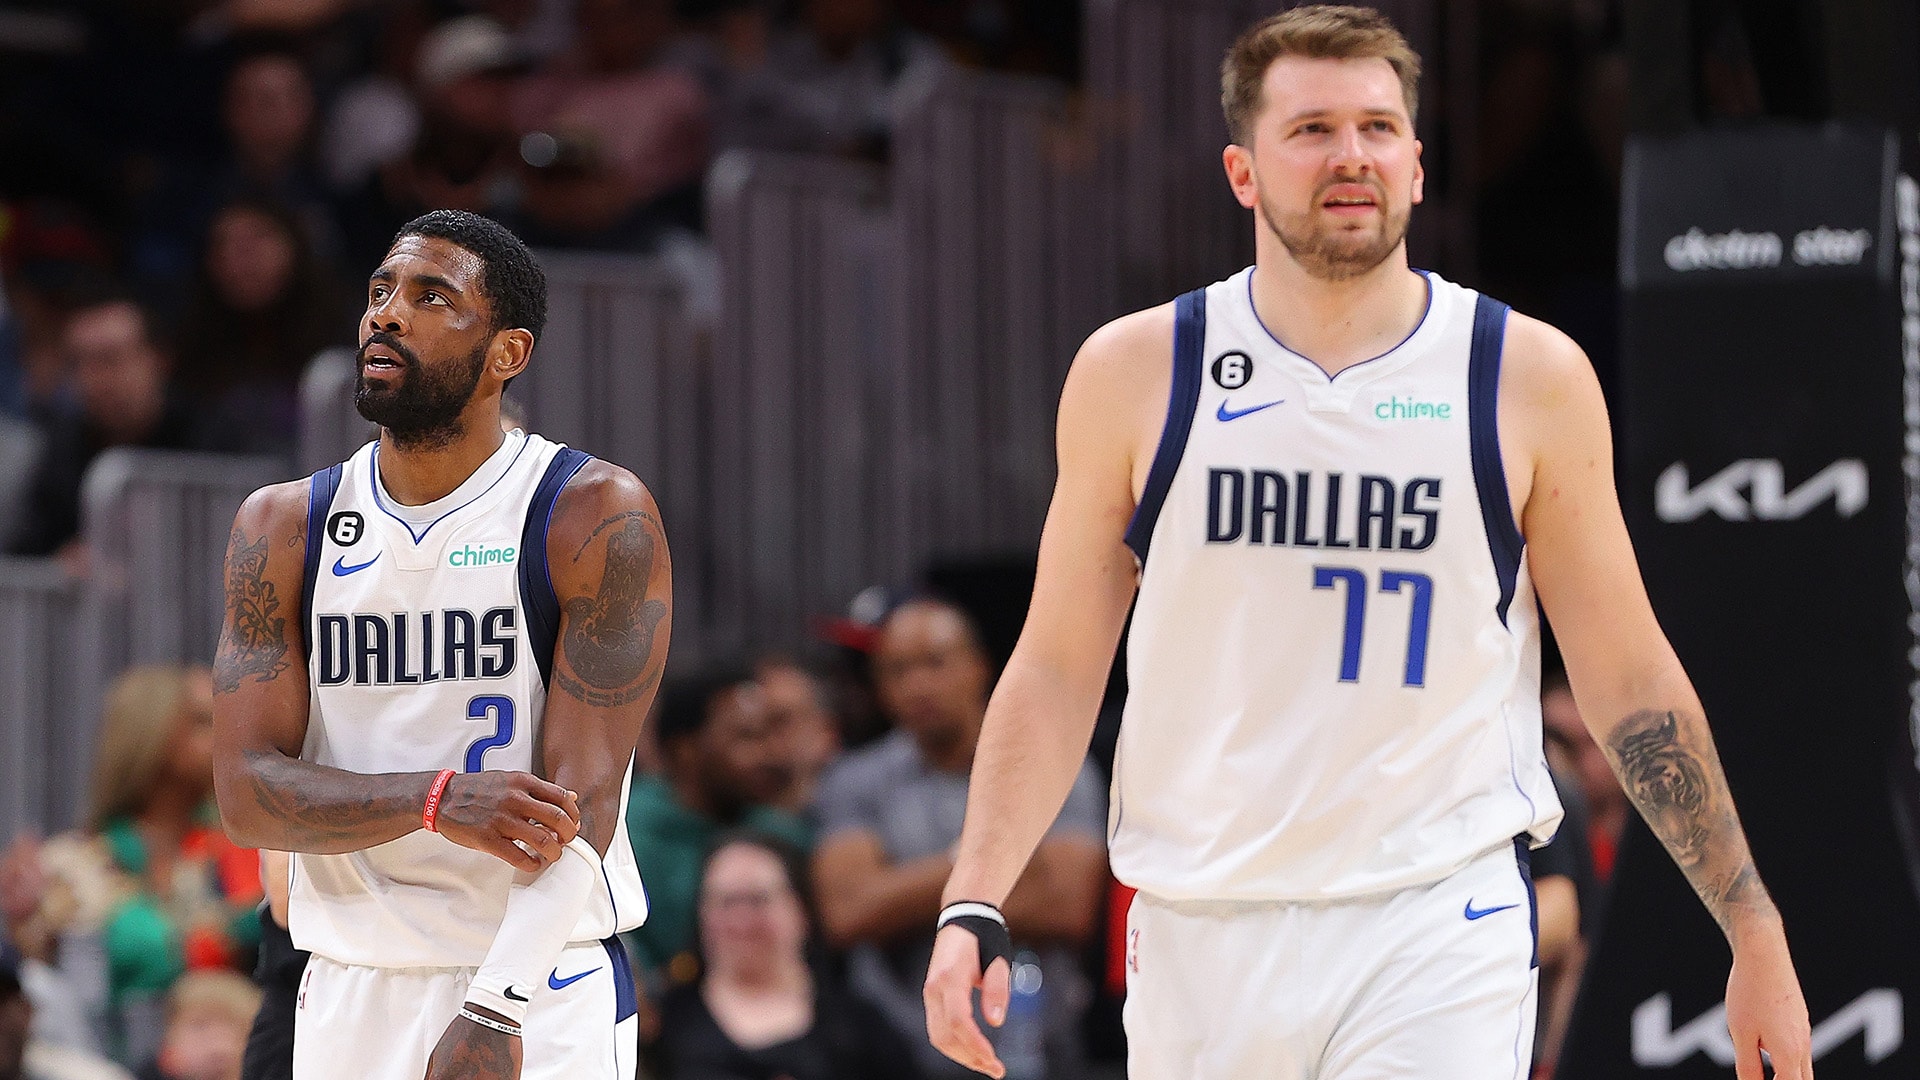 Can Kyrie Irving, Luka Doncic resolve season of unmet expectations? |  NBA.com